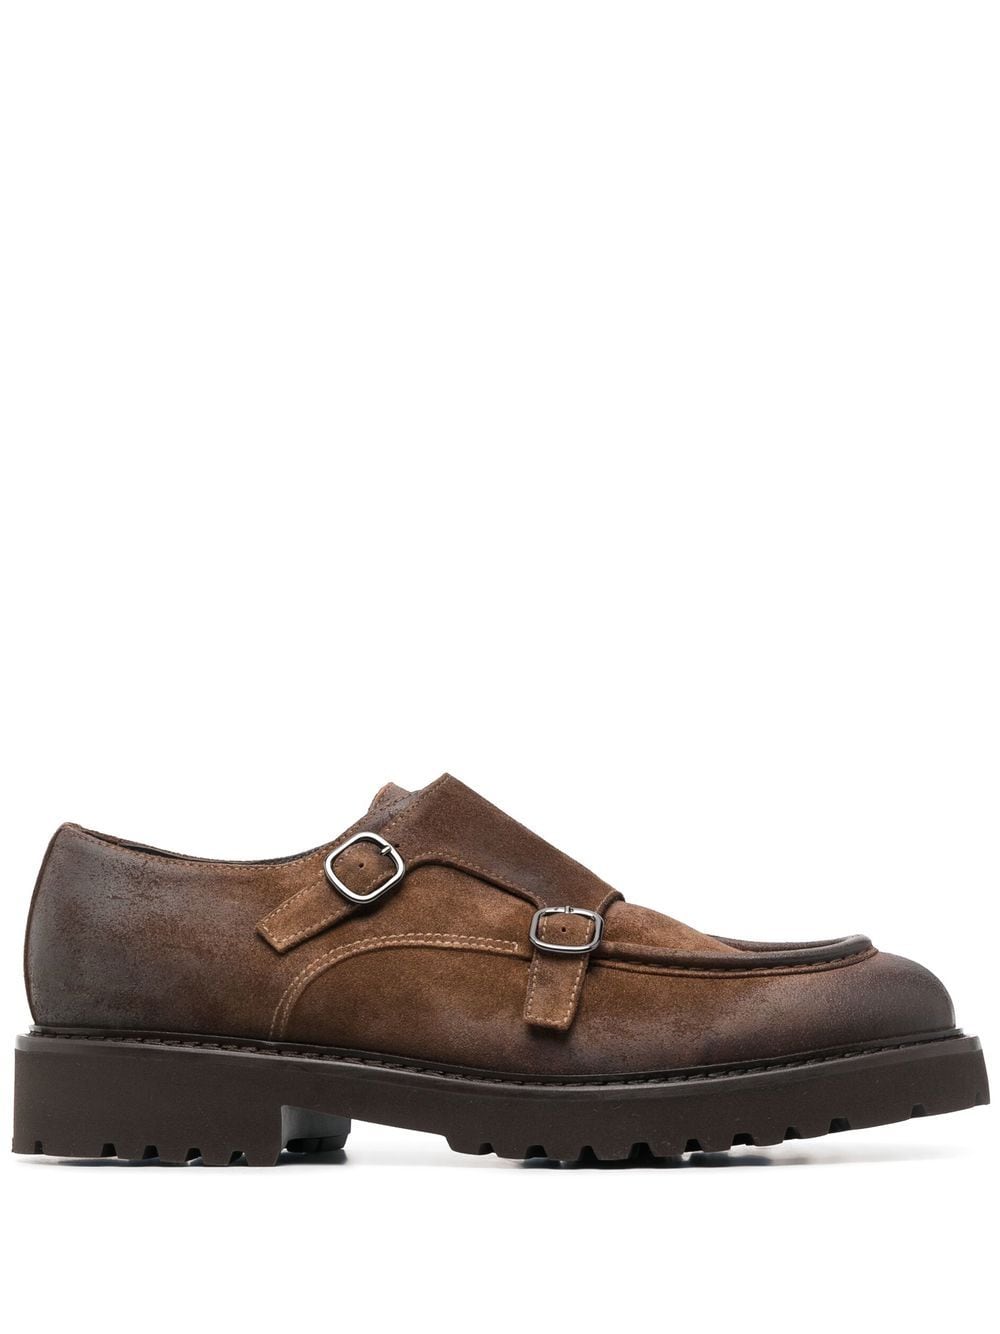 Doucal's double-buckle suede shoes - Brown von Doucal's